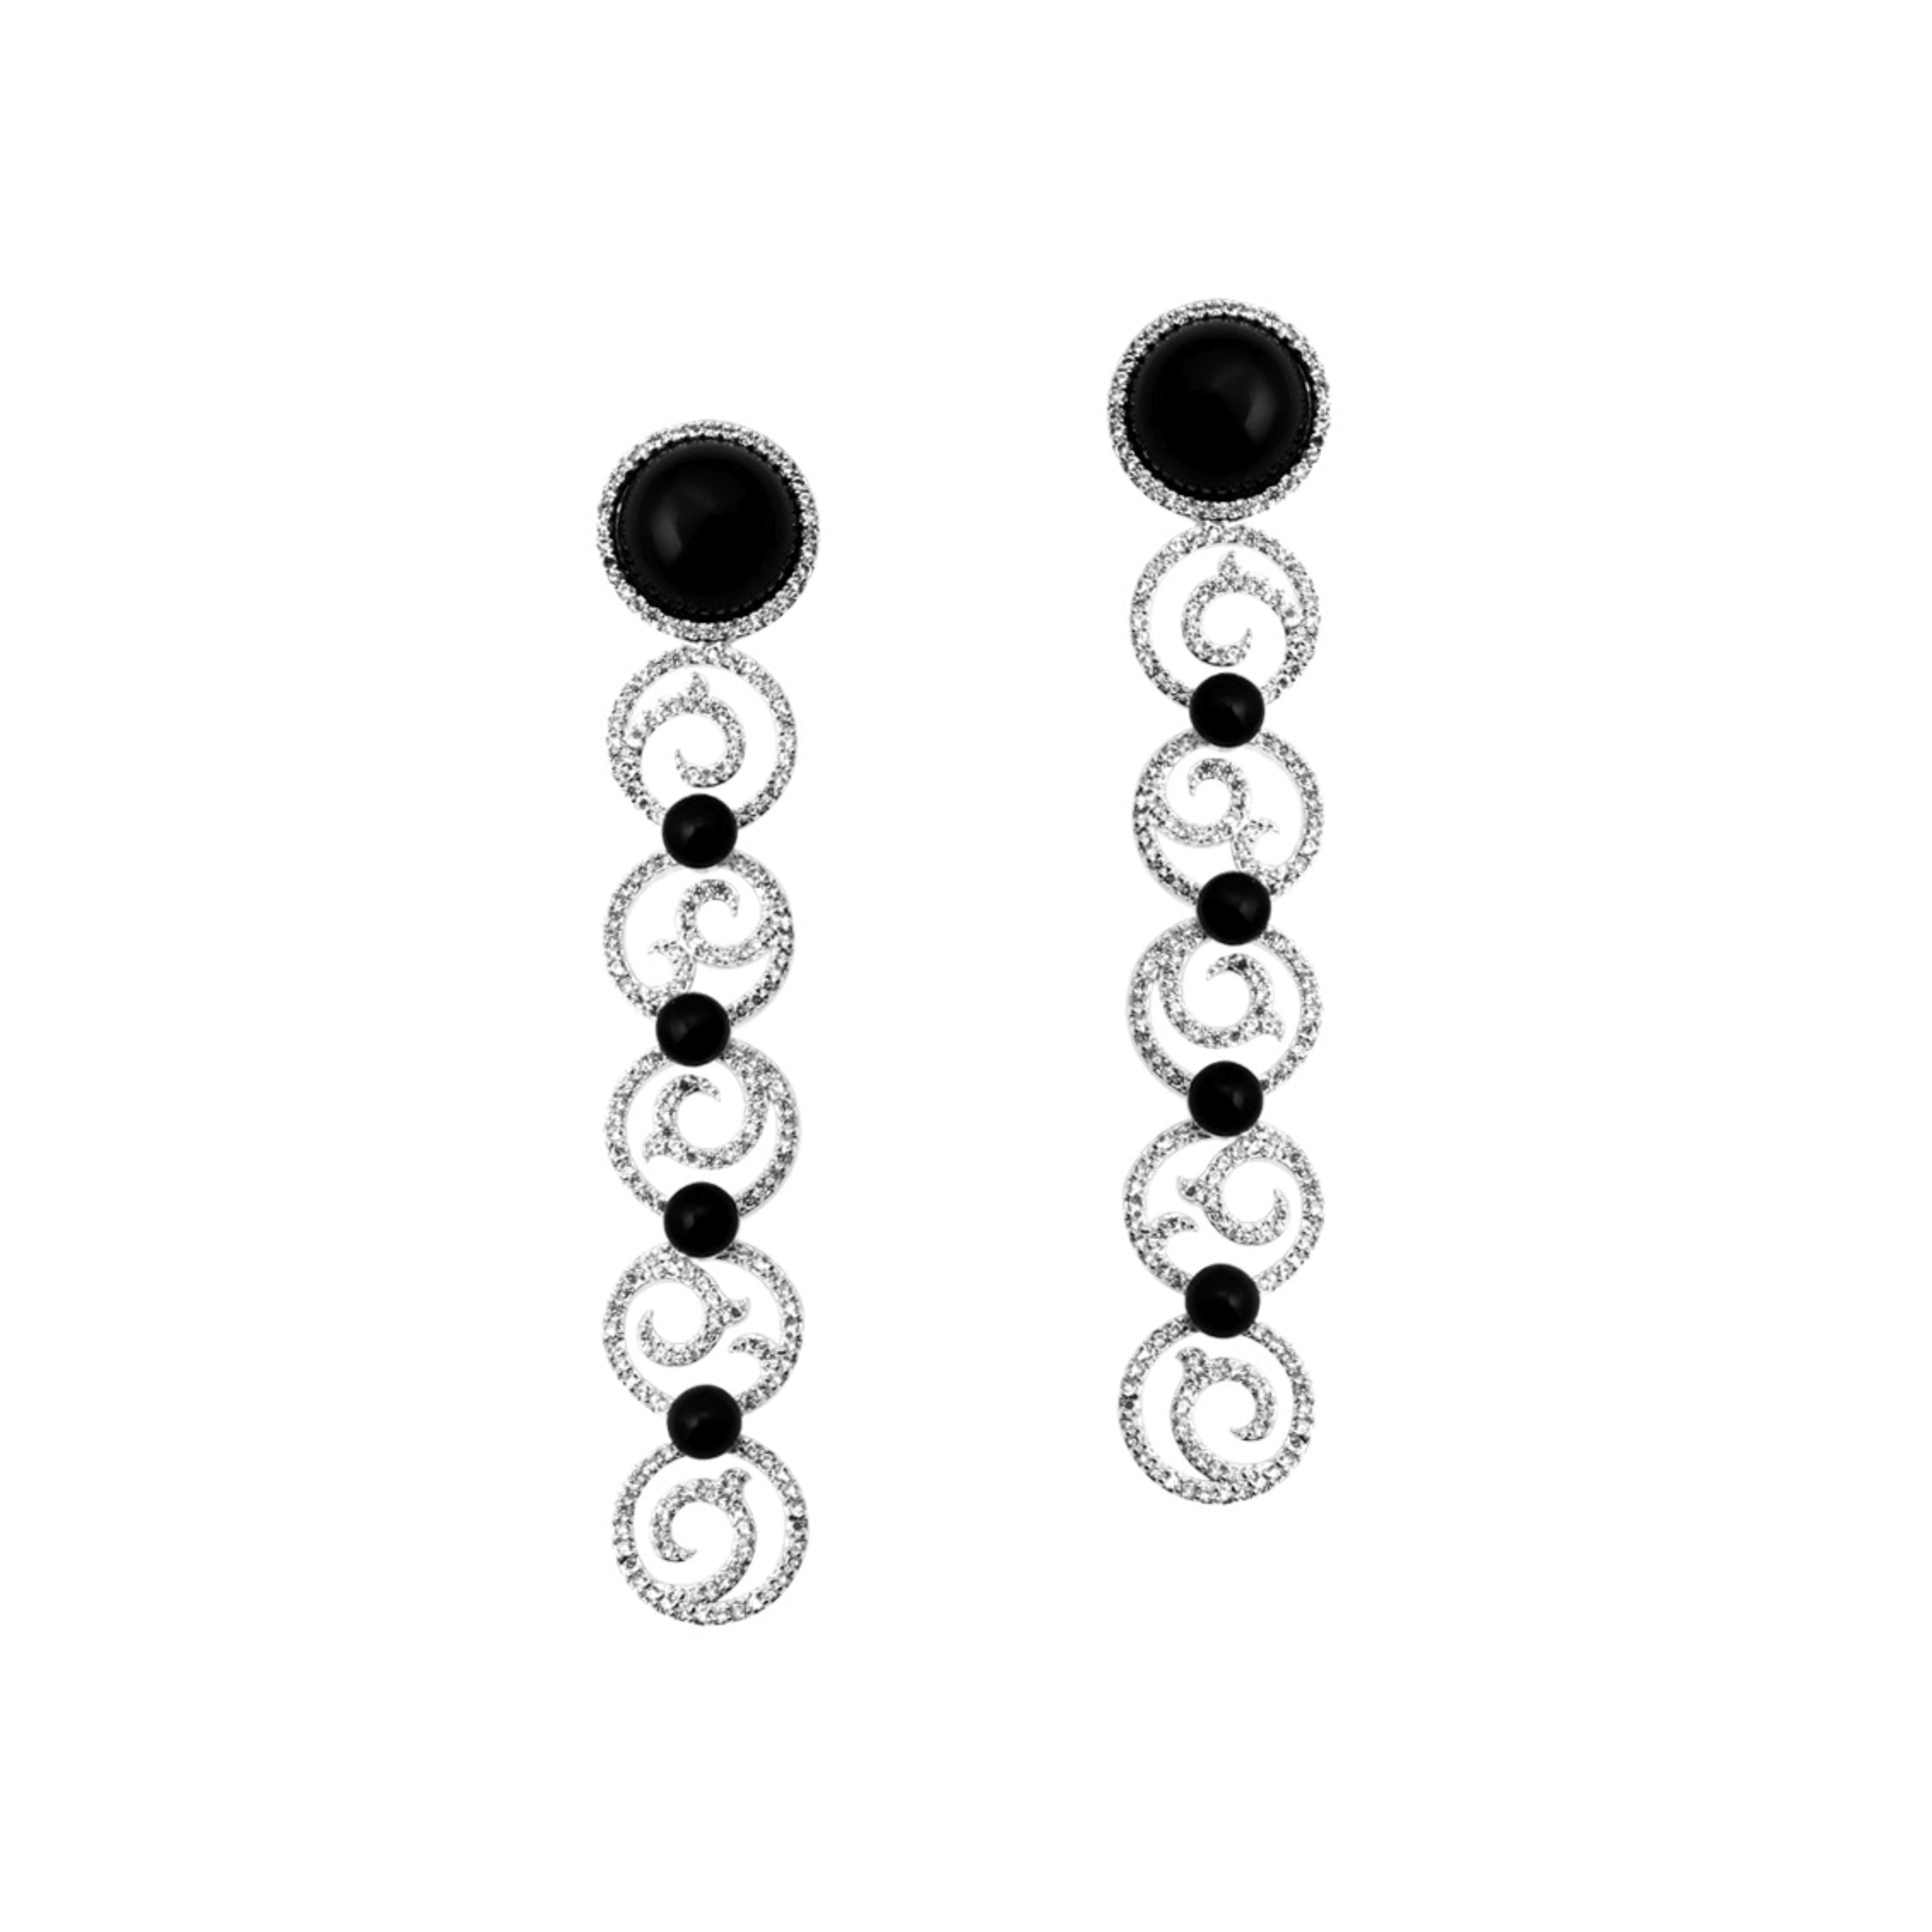 Lace stone -latest EARRING,Sets design 2021